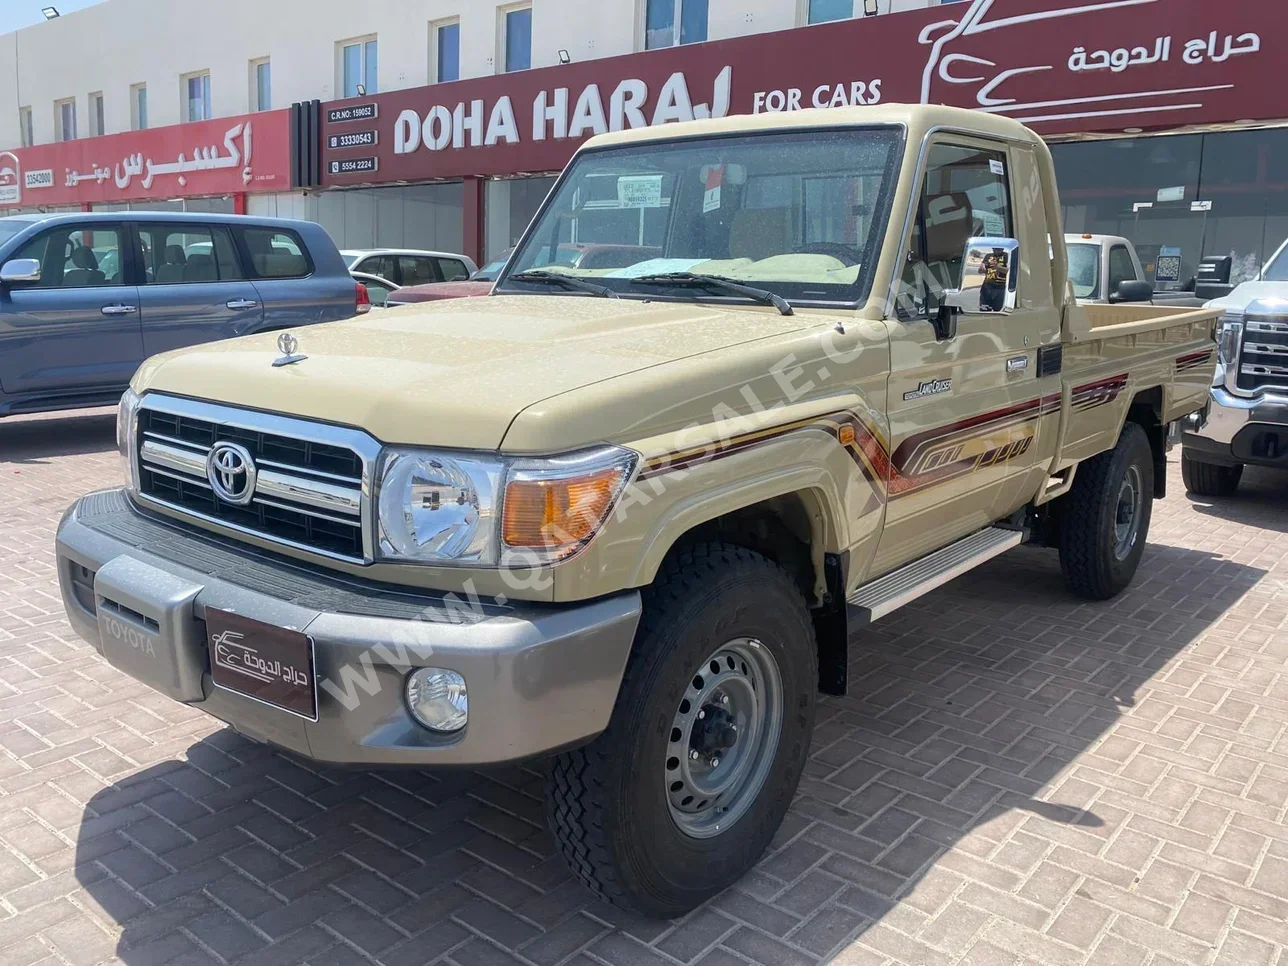 Toyota  Land Cruiser  LX  2022  Manual  6,000 Km  6 Cylinder  Four Wheel Drive (4WD)  Pick Up  Beige  With Warranty